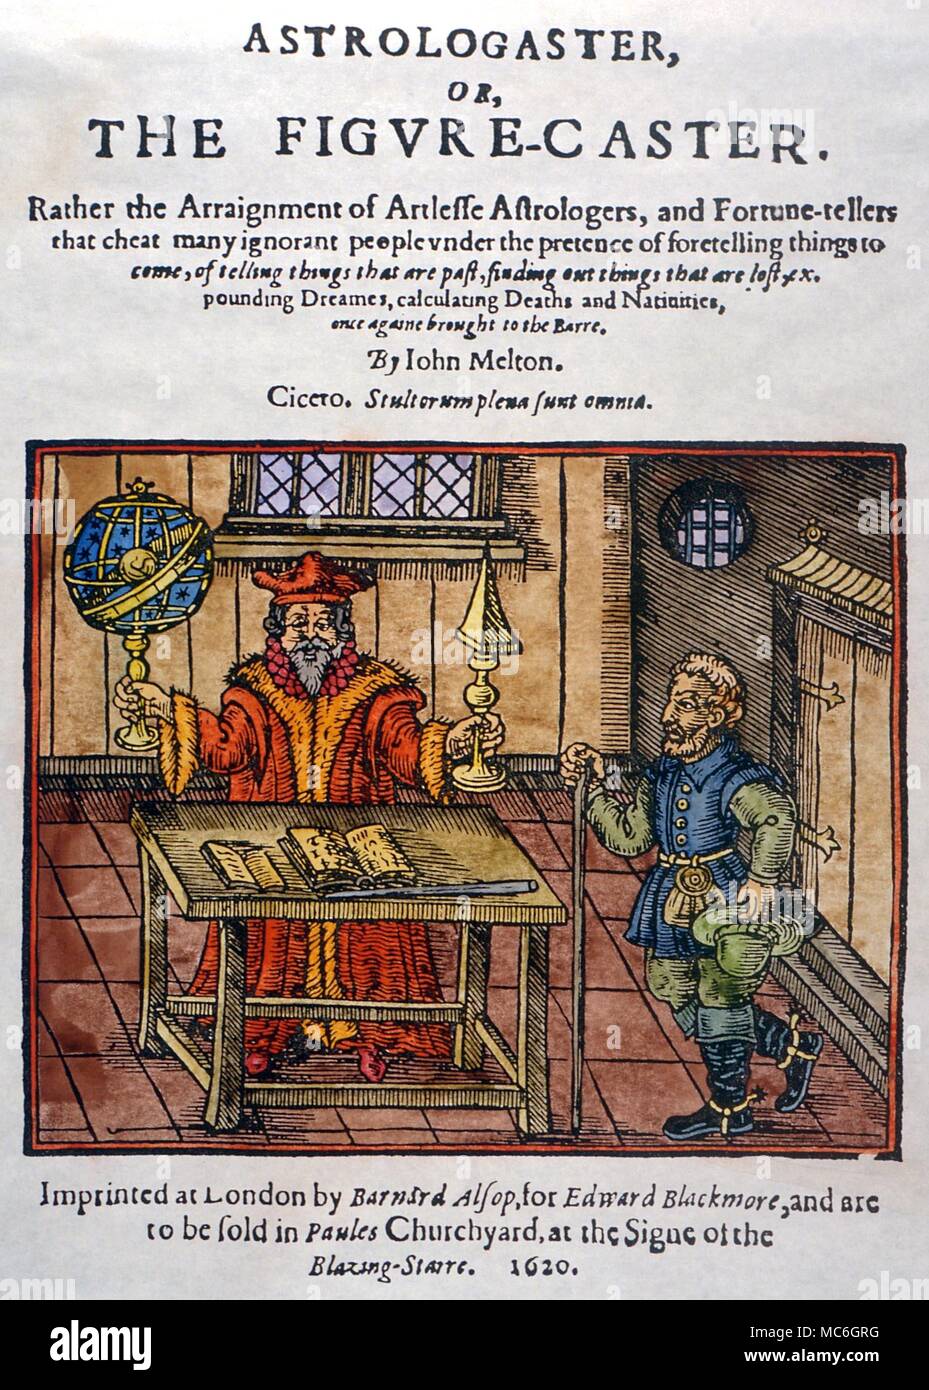 ASTROLOGY - Astrologer with a client. Title-page illustration to John Melton's 'The Astrologasters', or Figure-Caster. 1620 Stock Photo